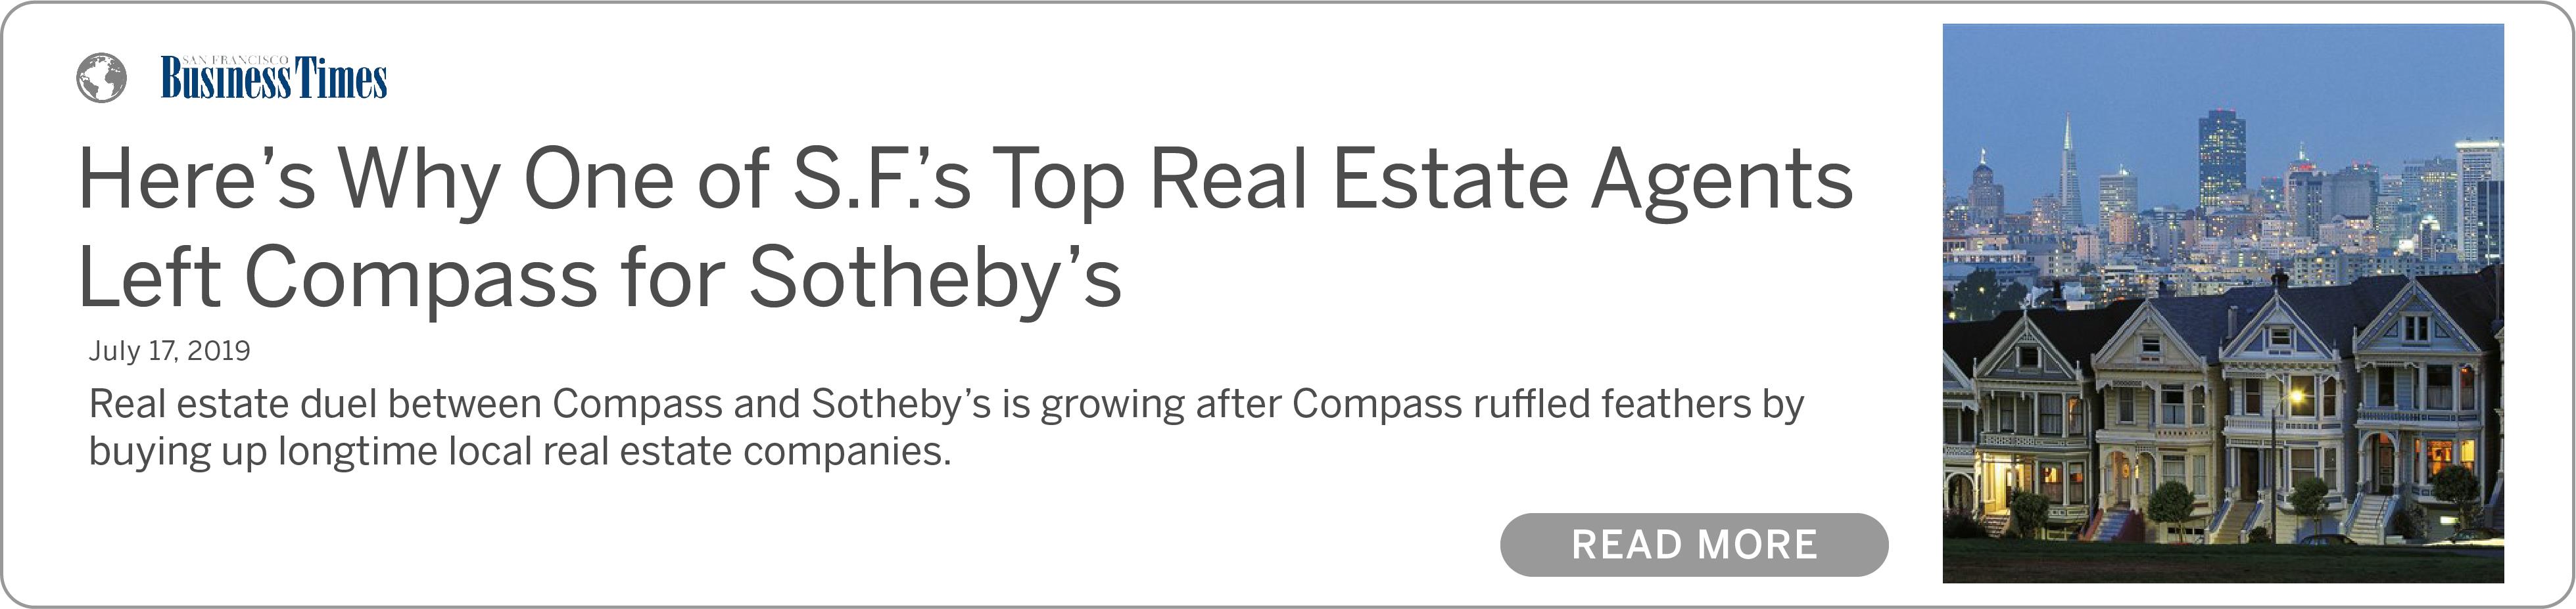 Here's Why One of S.F.'s Top Real Estate Agents Left Compass for Sotheby's